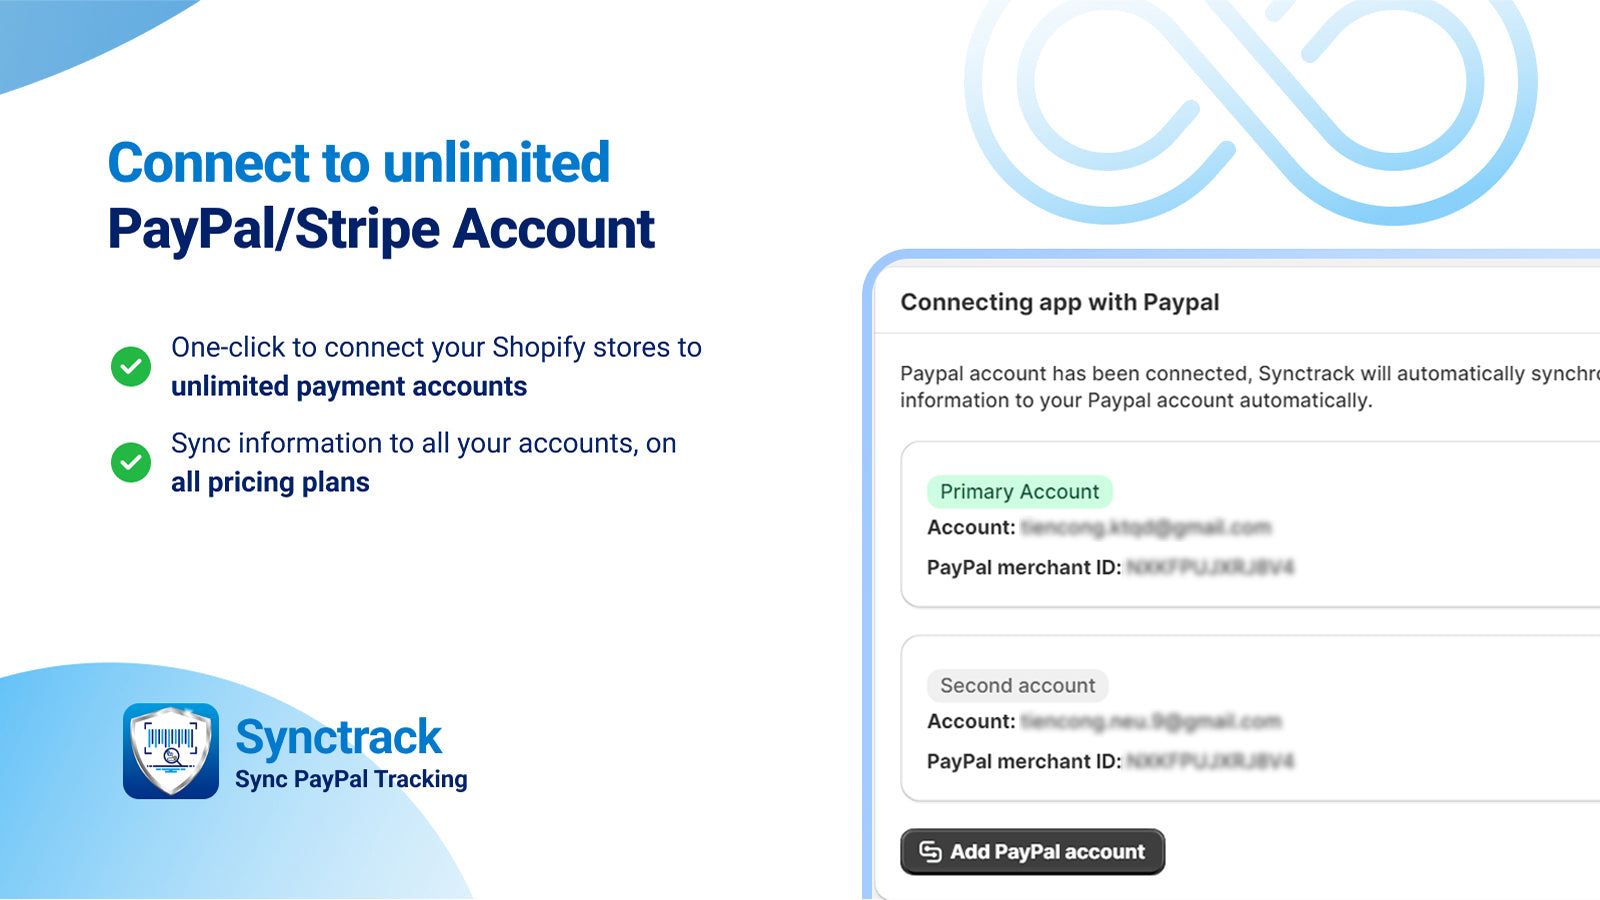 Synctrack supports unlimited PayPal and Stripe accounts